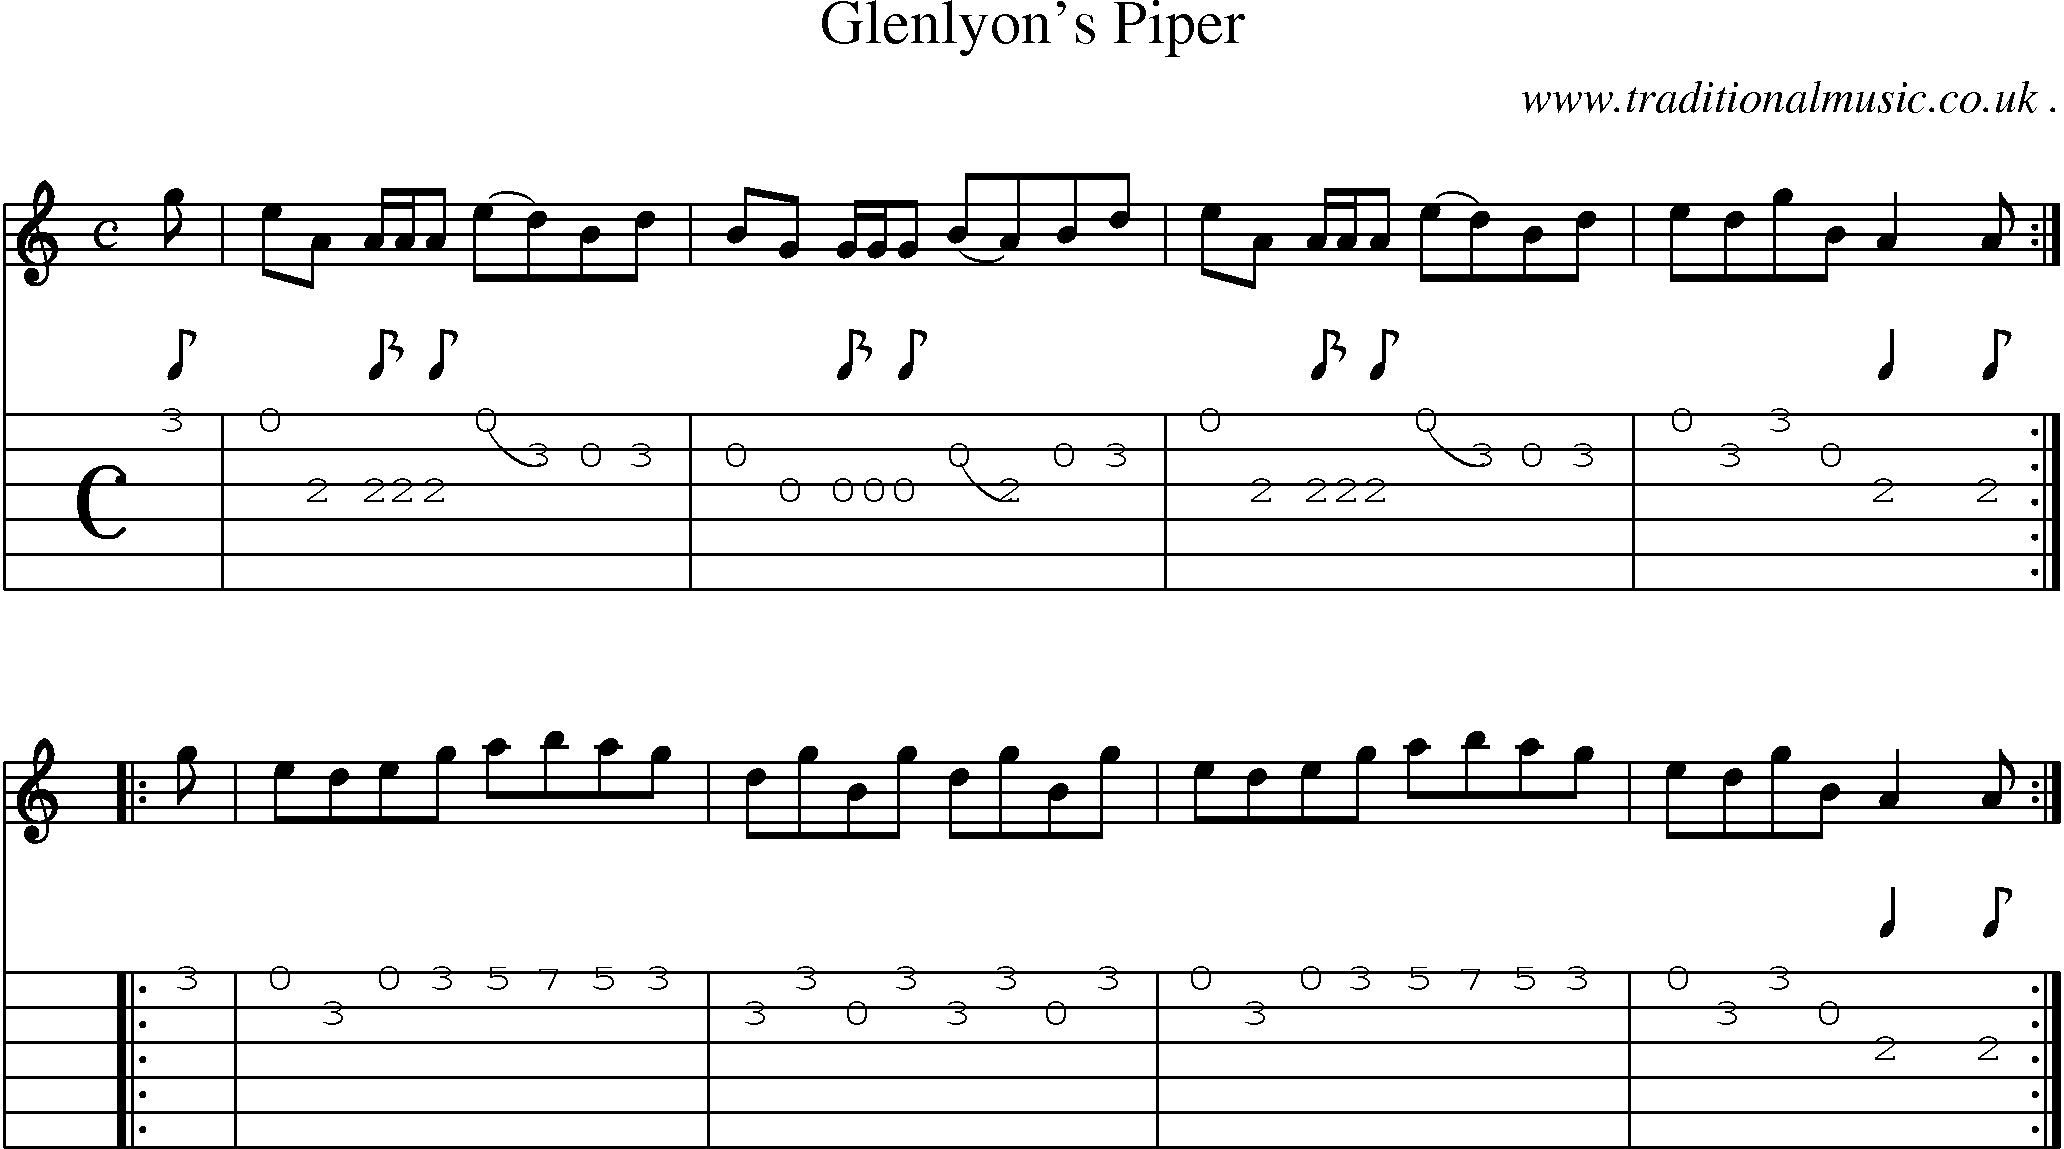 Sheet-music  score, Chords and Guitar Tabs for Glenlyons Piper